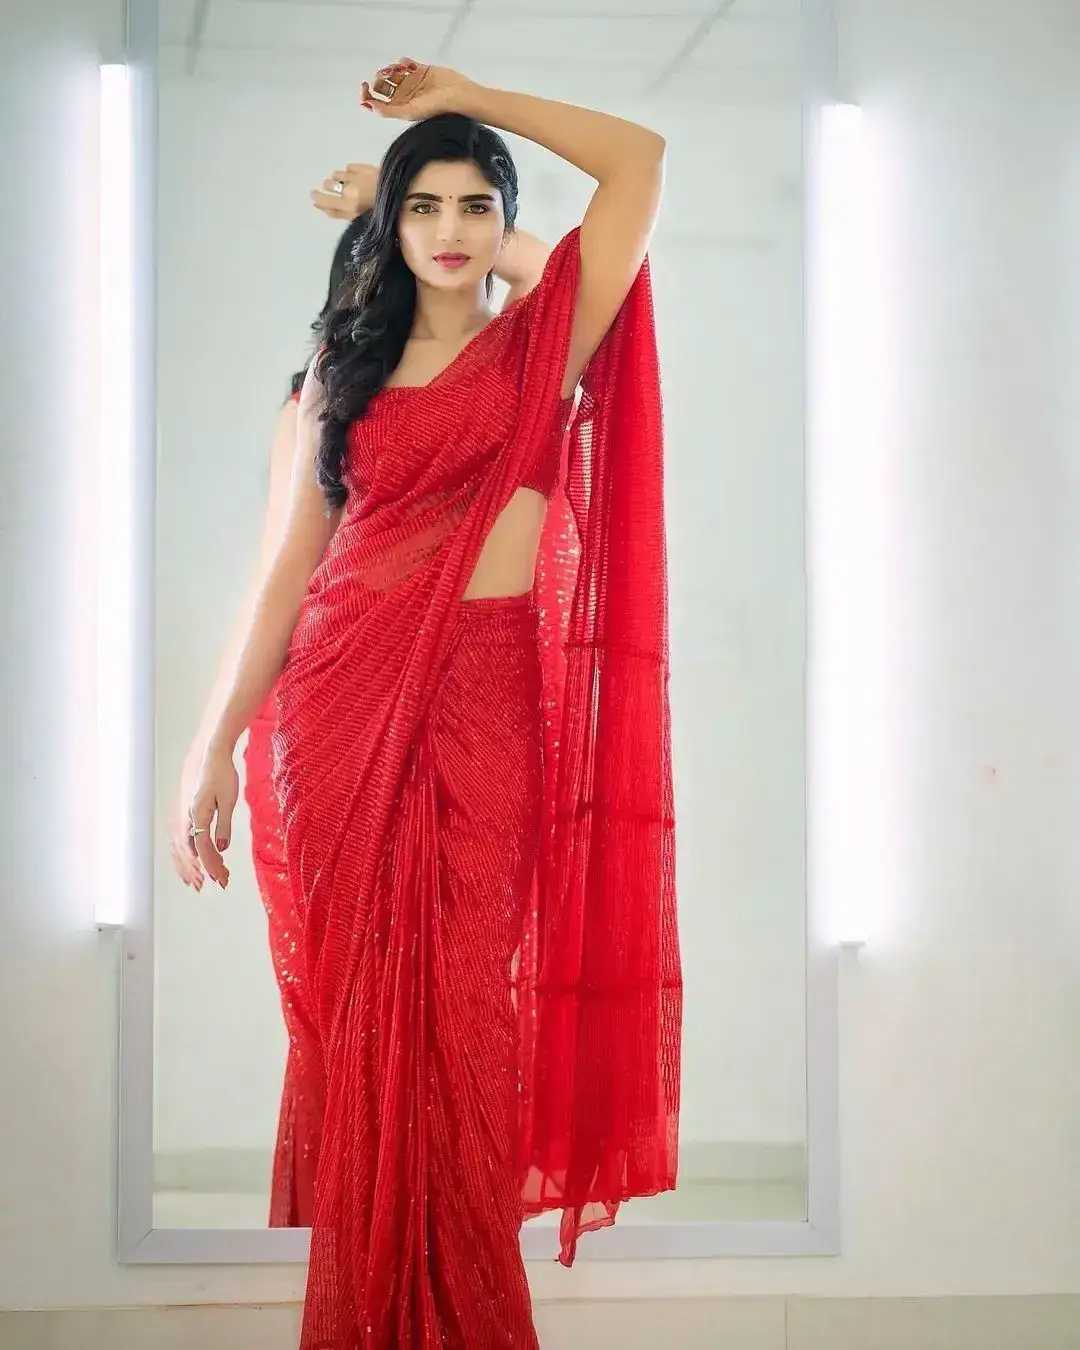 INDIAN ACTRESS JABARDASTH VARSHA IMAGES IN RED COLOUR SAREE 1